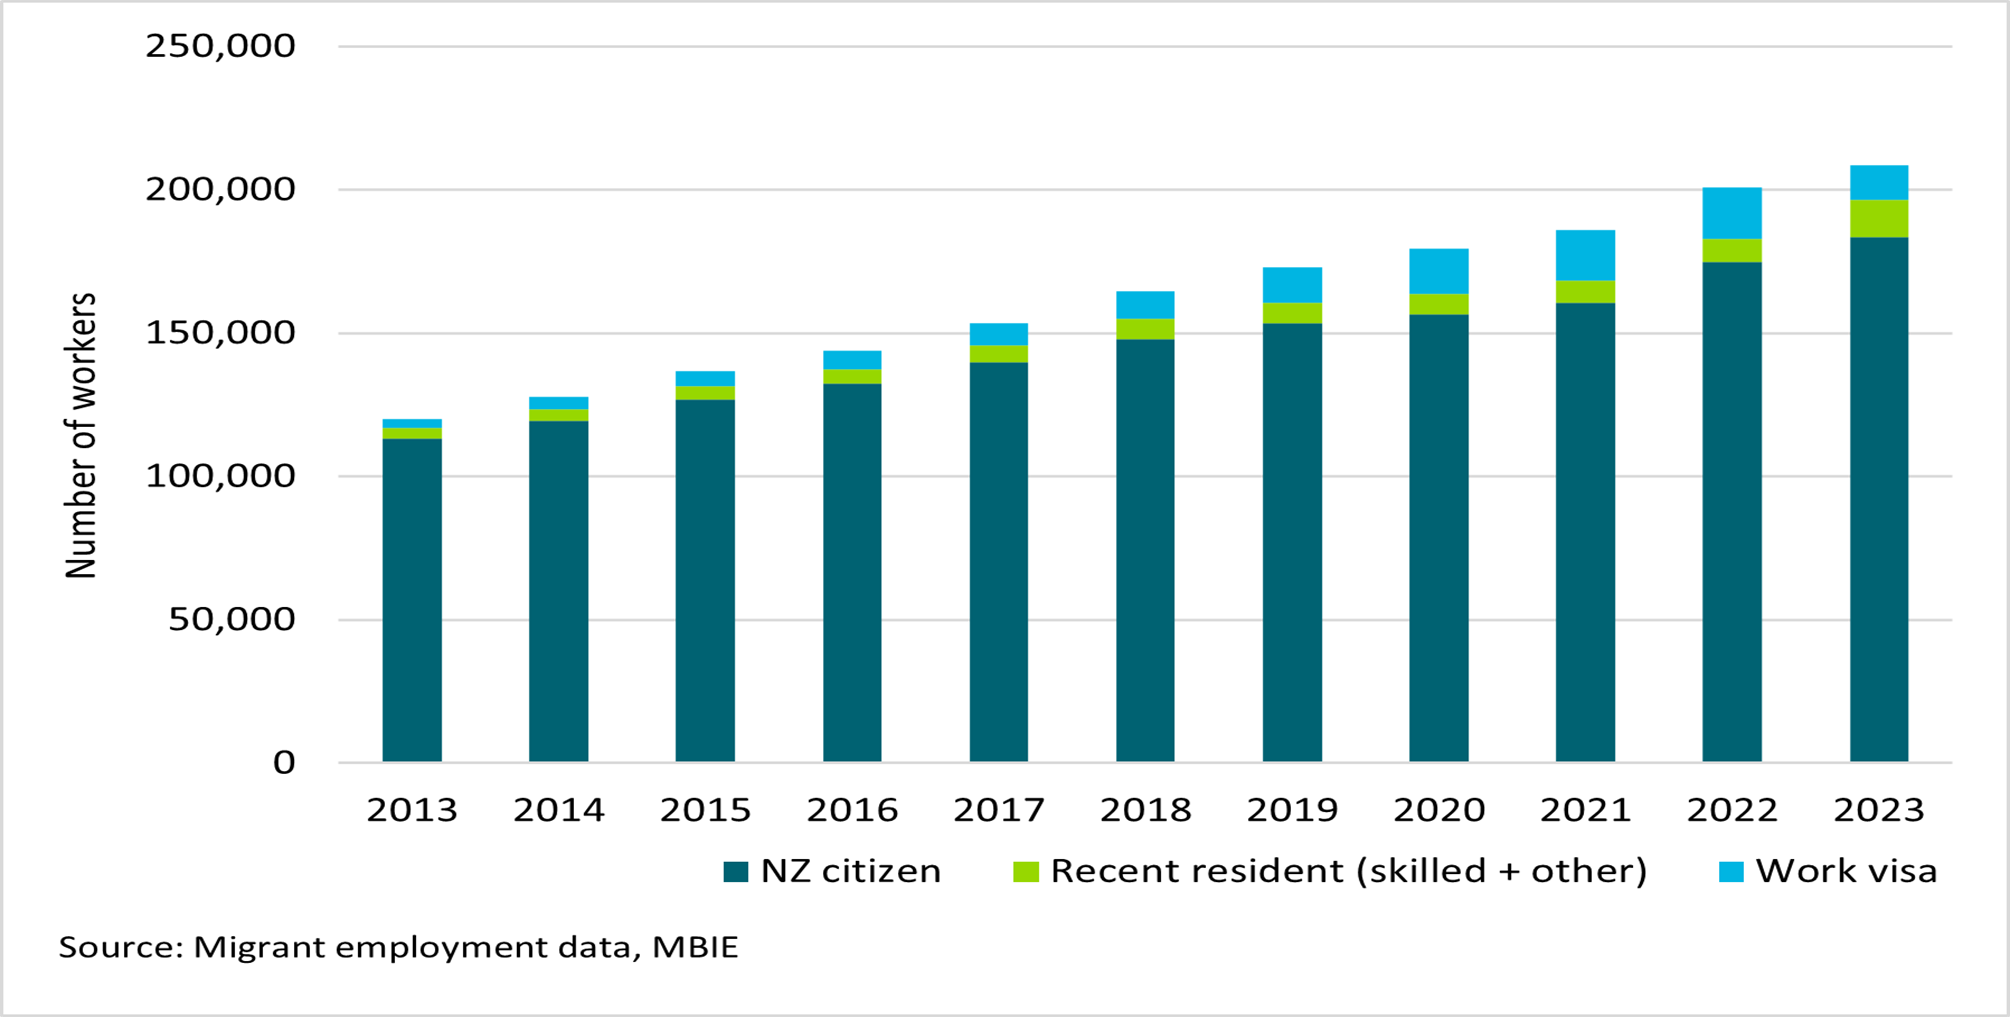 Figure 7: Construction workers by residency status (year ended March 2013-2023). Illustrates changes in the residency status of construction workers over time, reflecting migration trends.